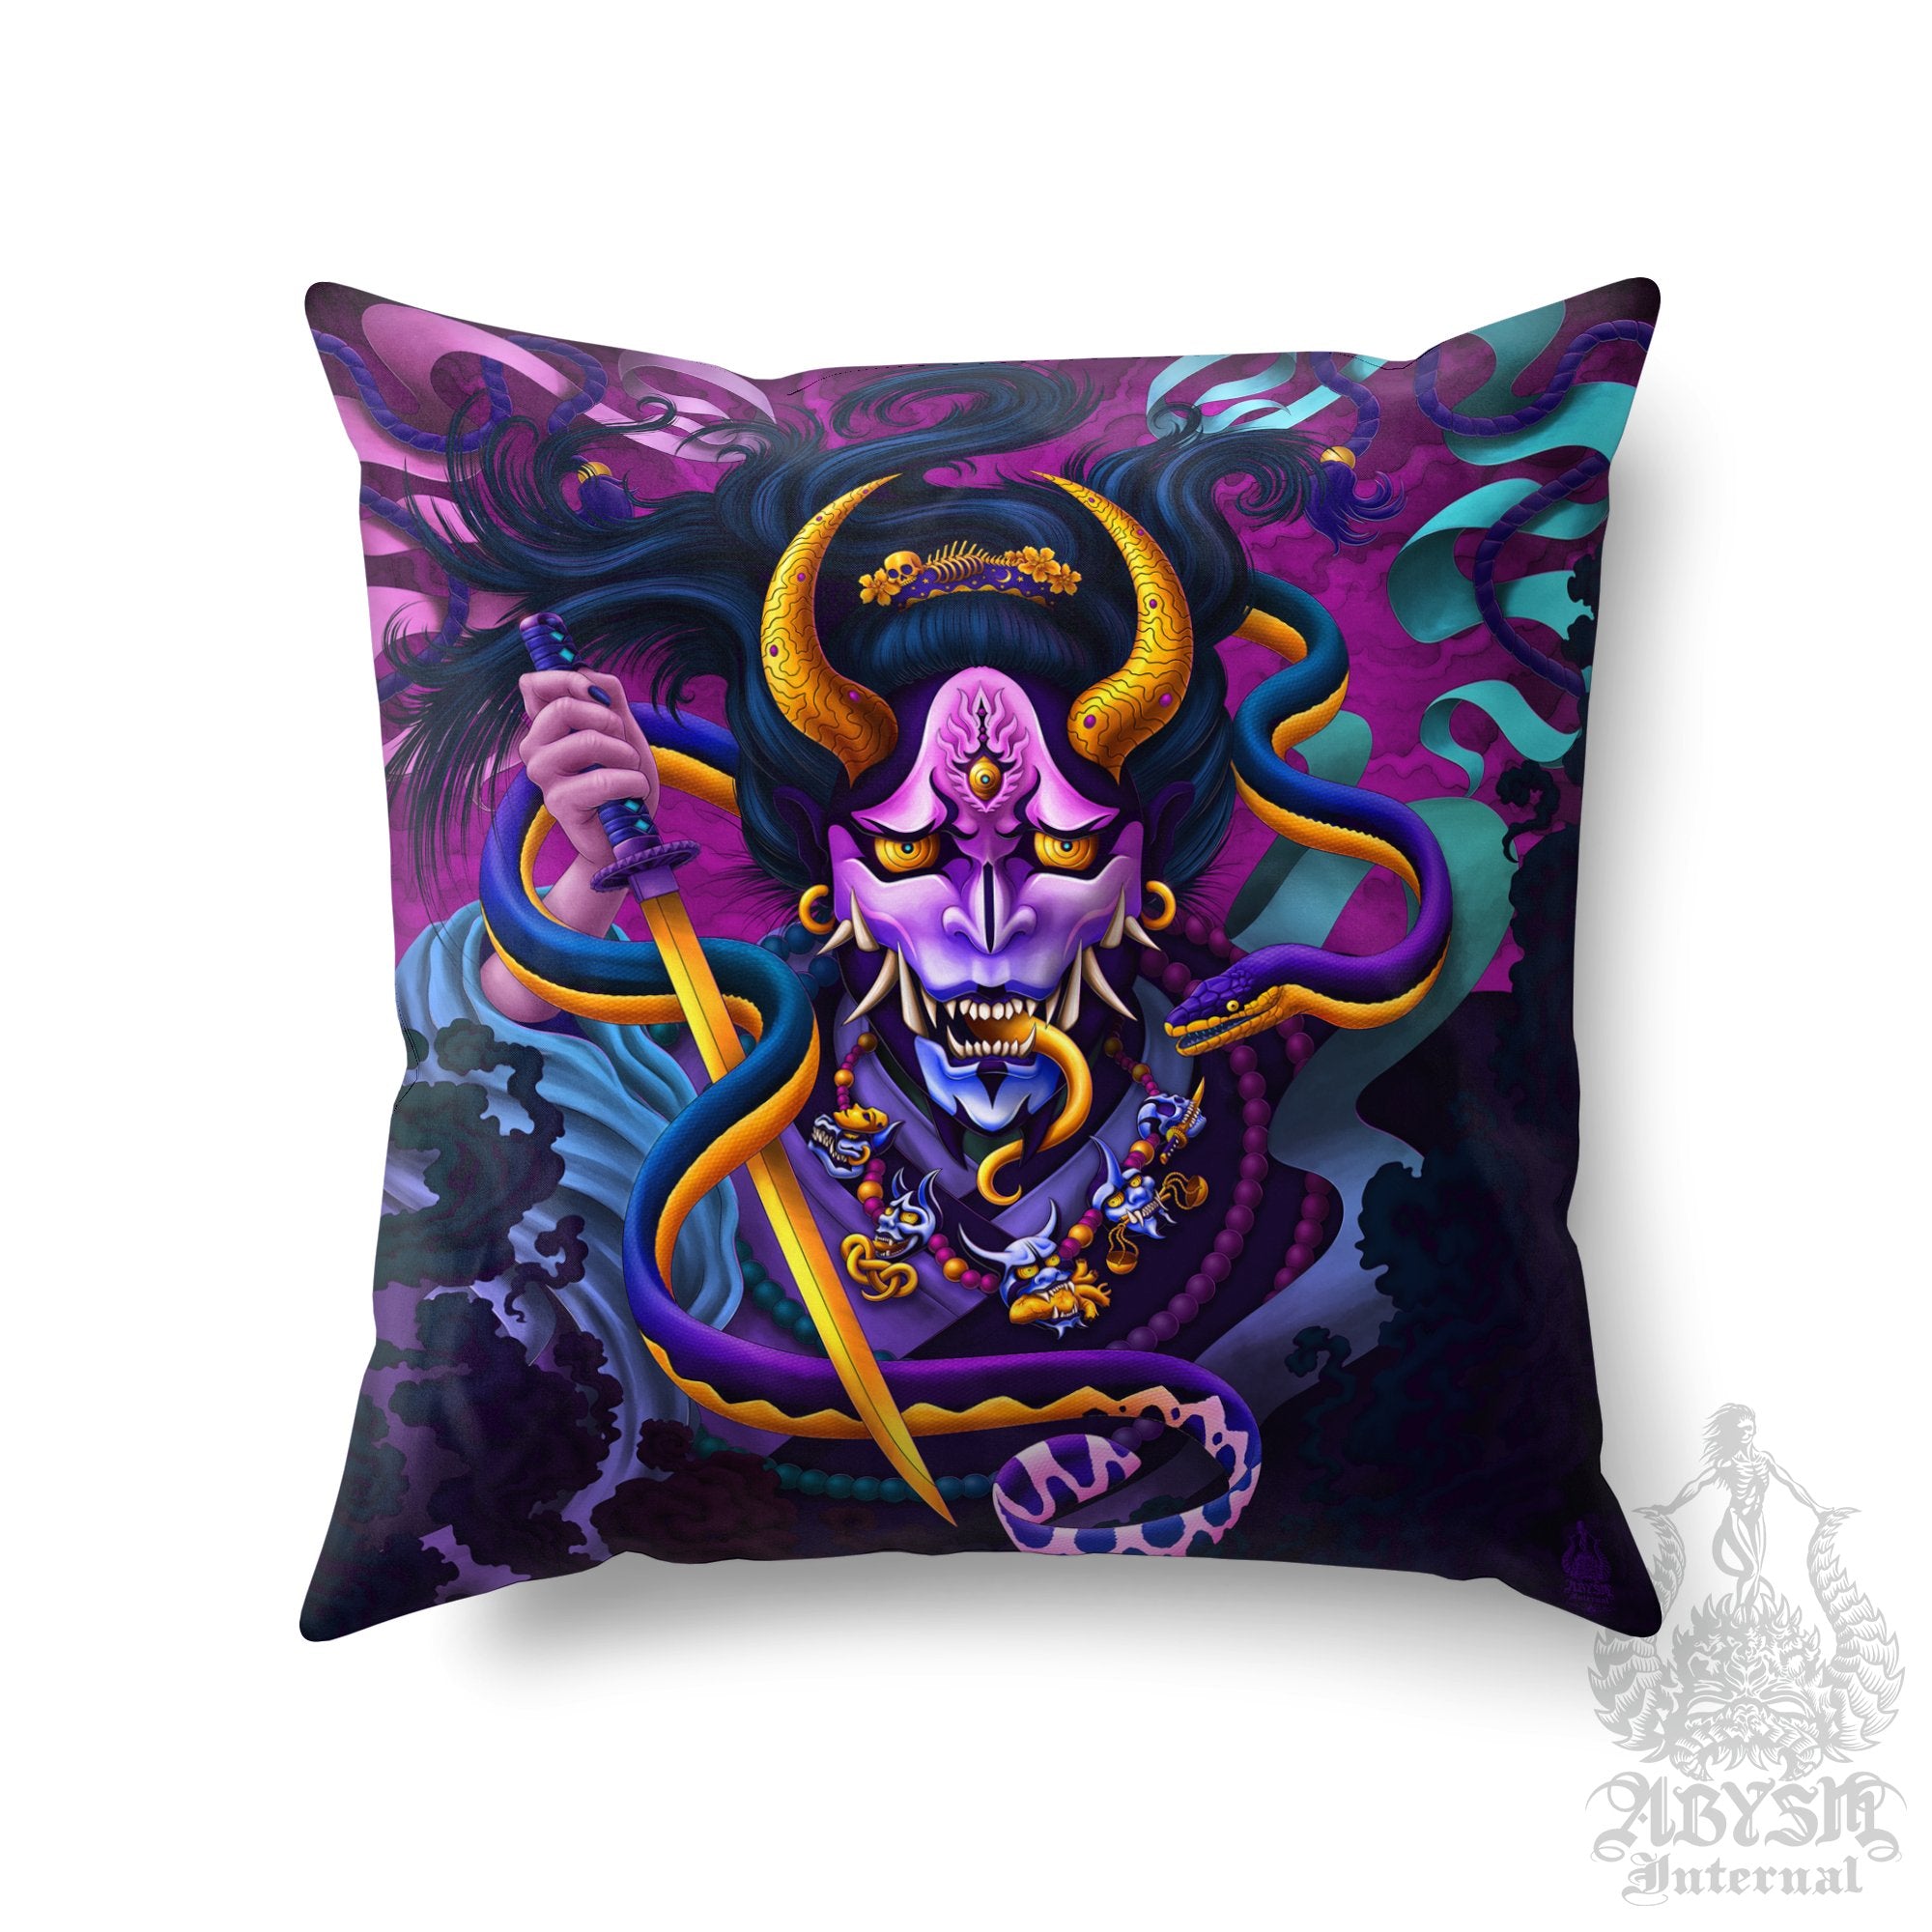 Hannya Throw Pillow, Decorative Accent Pillow, Square Cushion Cover, Japanese Demon & Snake, Gamer Room Decor - Pastel Black - Abysm Internal